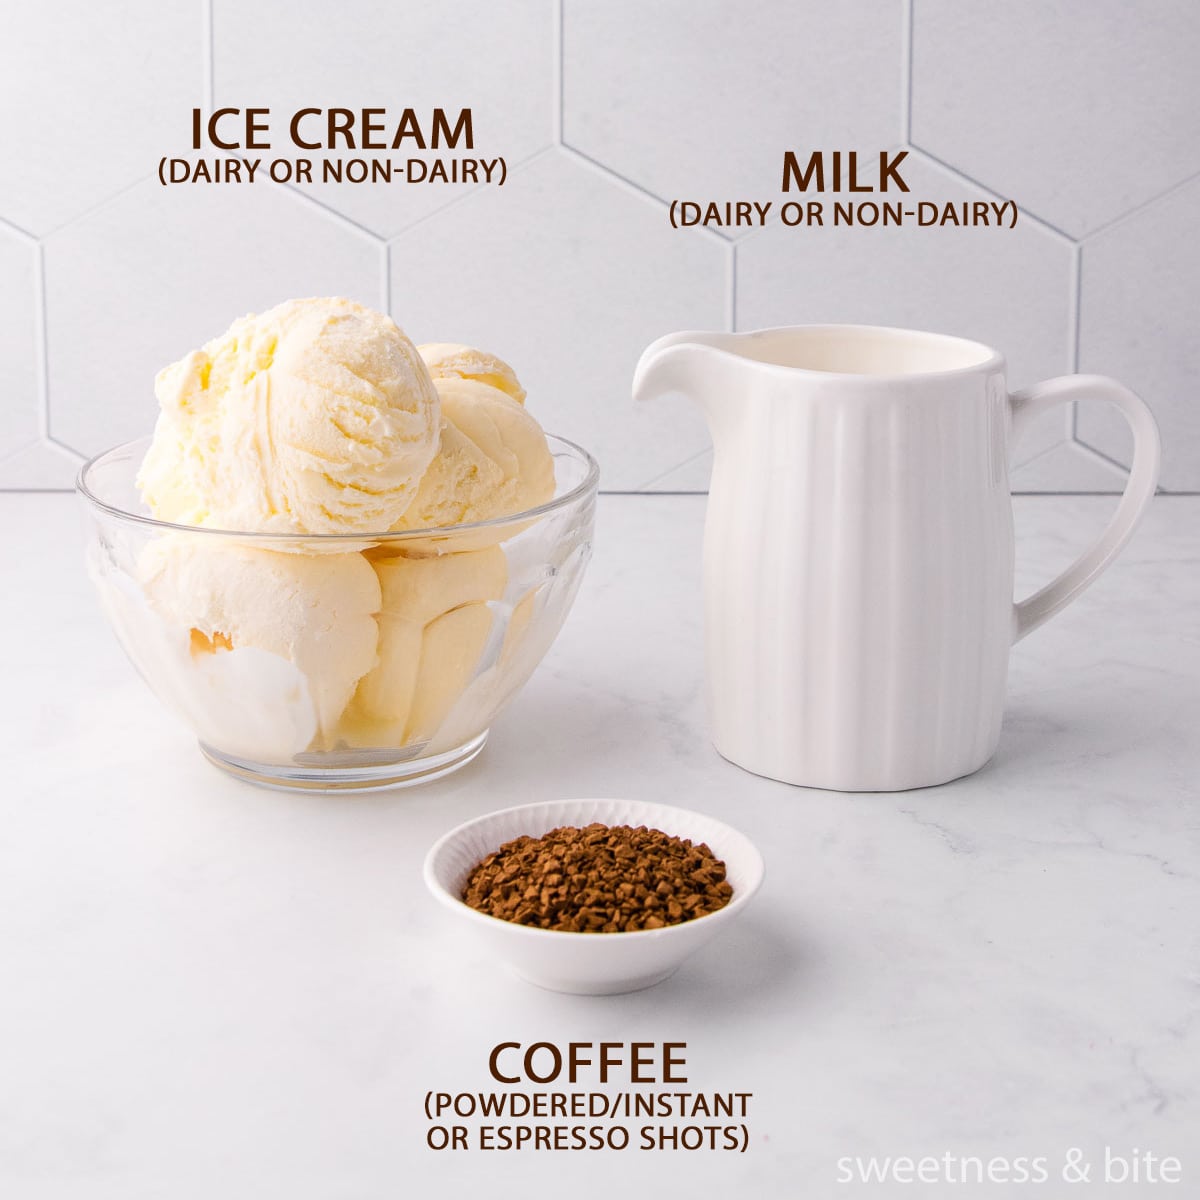 The coffee milkshake ingredients - scoops of vanilla ice cream in a glass bowl, milk in a white ceramic jug, and instant coffee granules in a small white bowl.